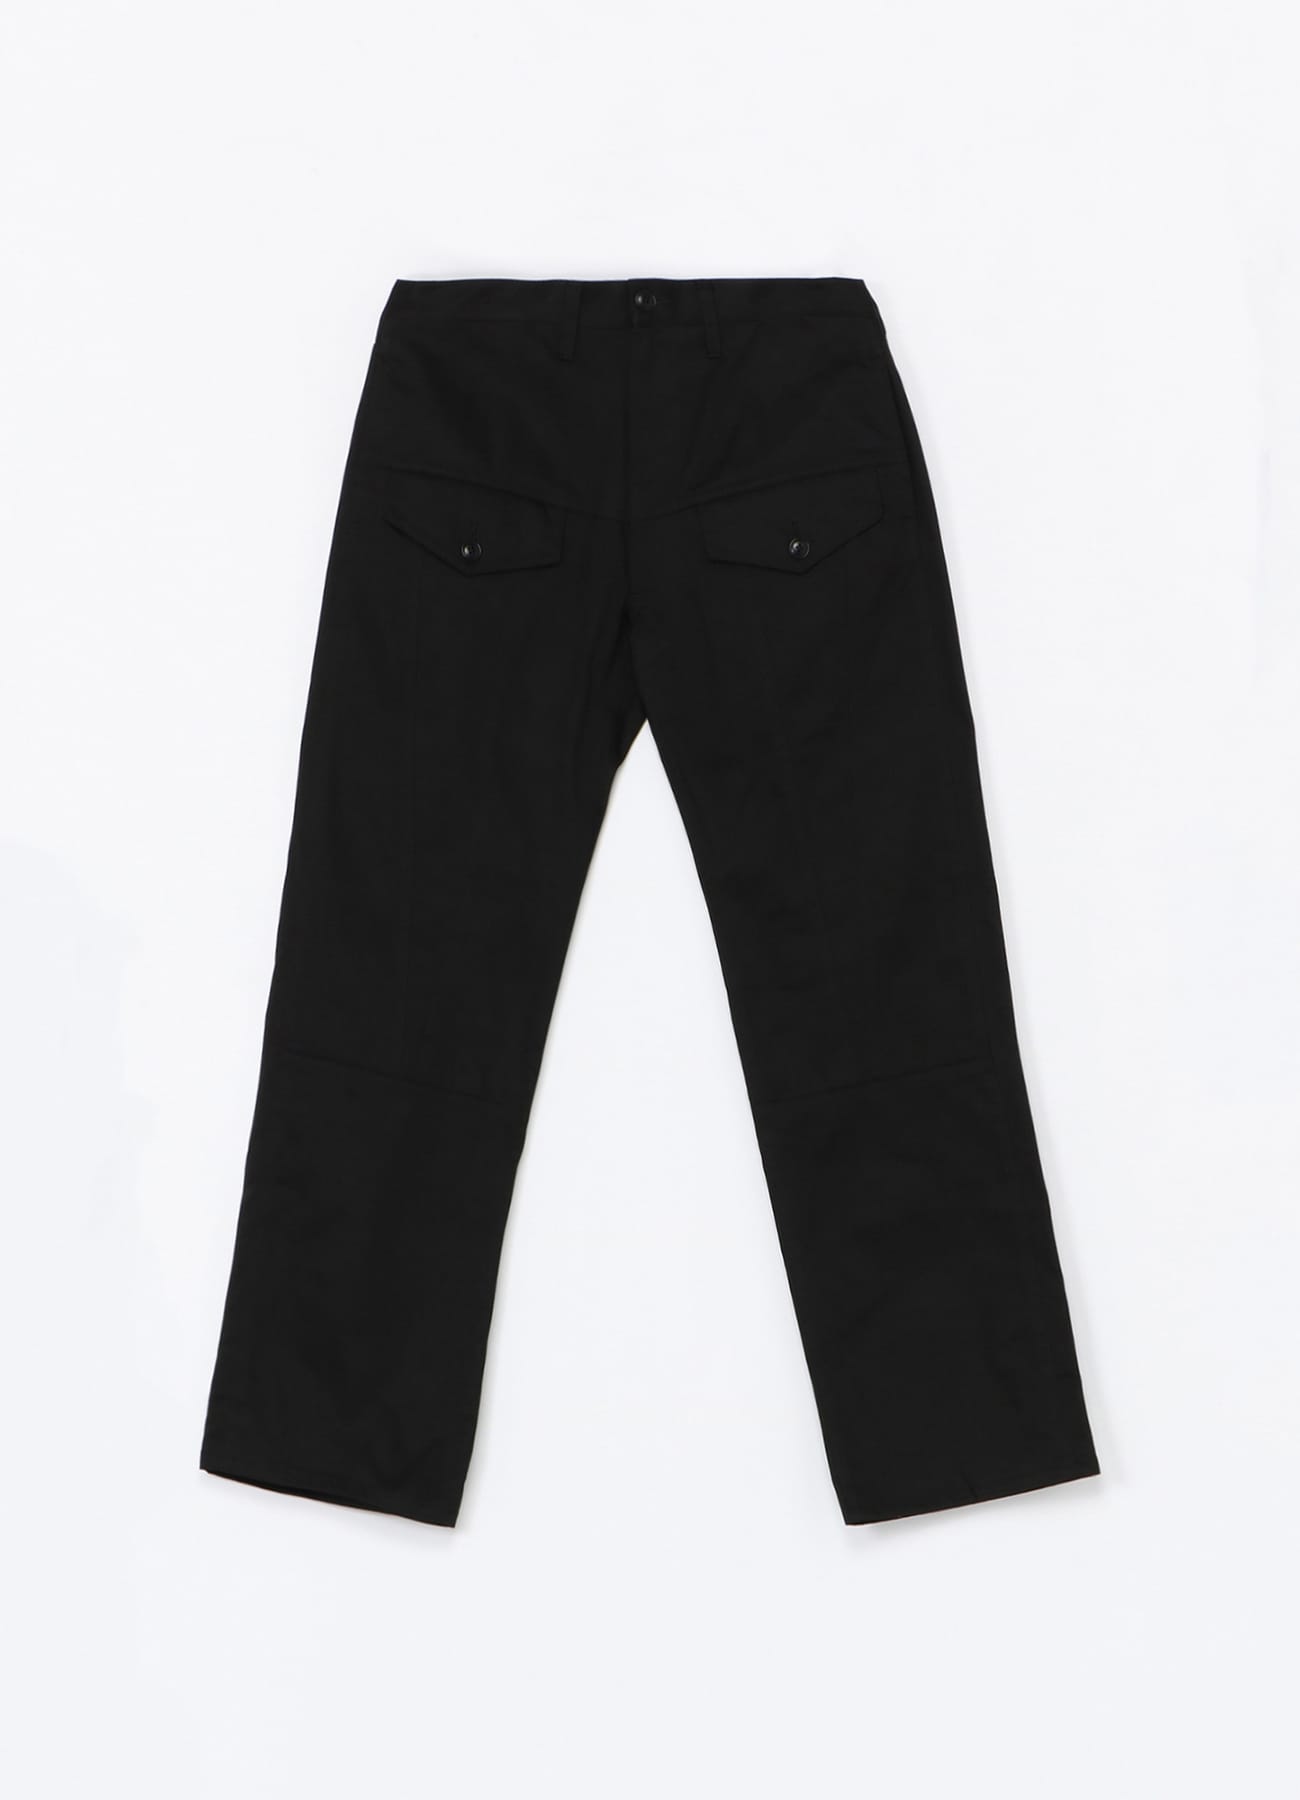 Cotton Chino Jeans Silhouette 3rd Pants